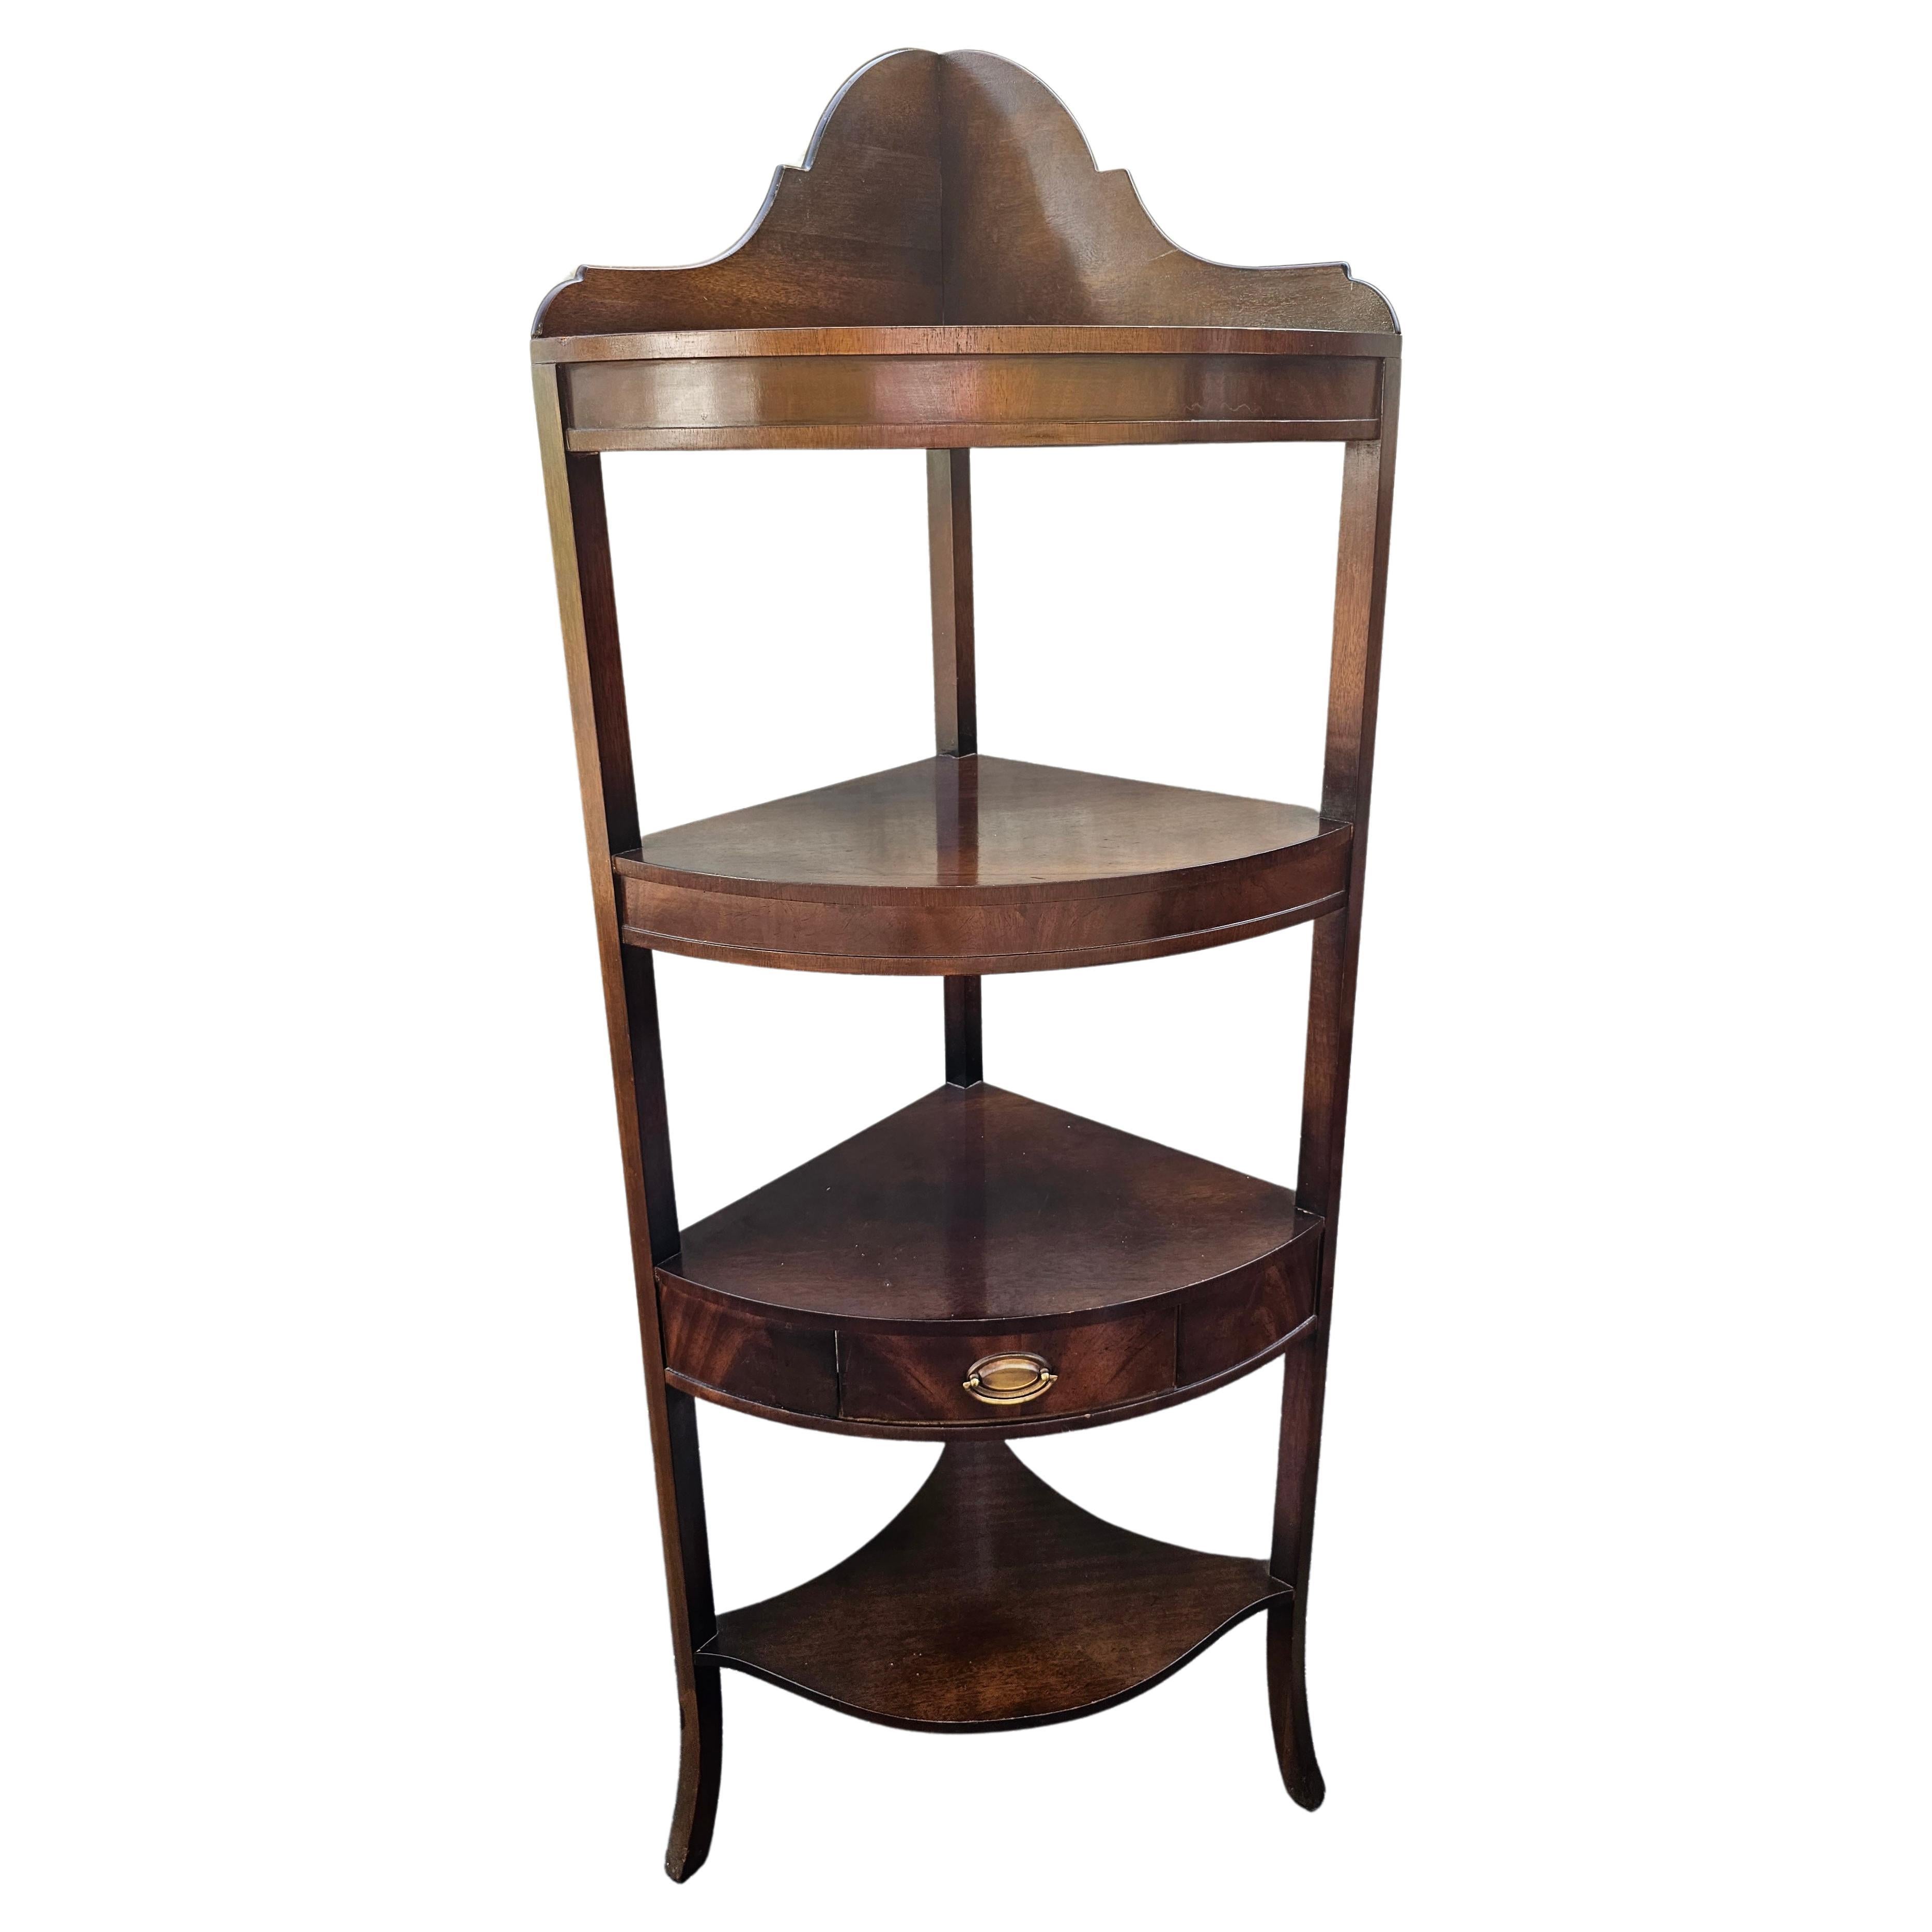 An early 20th century four-tier Federal Style corner shelf with one drawer measuring 22